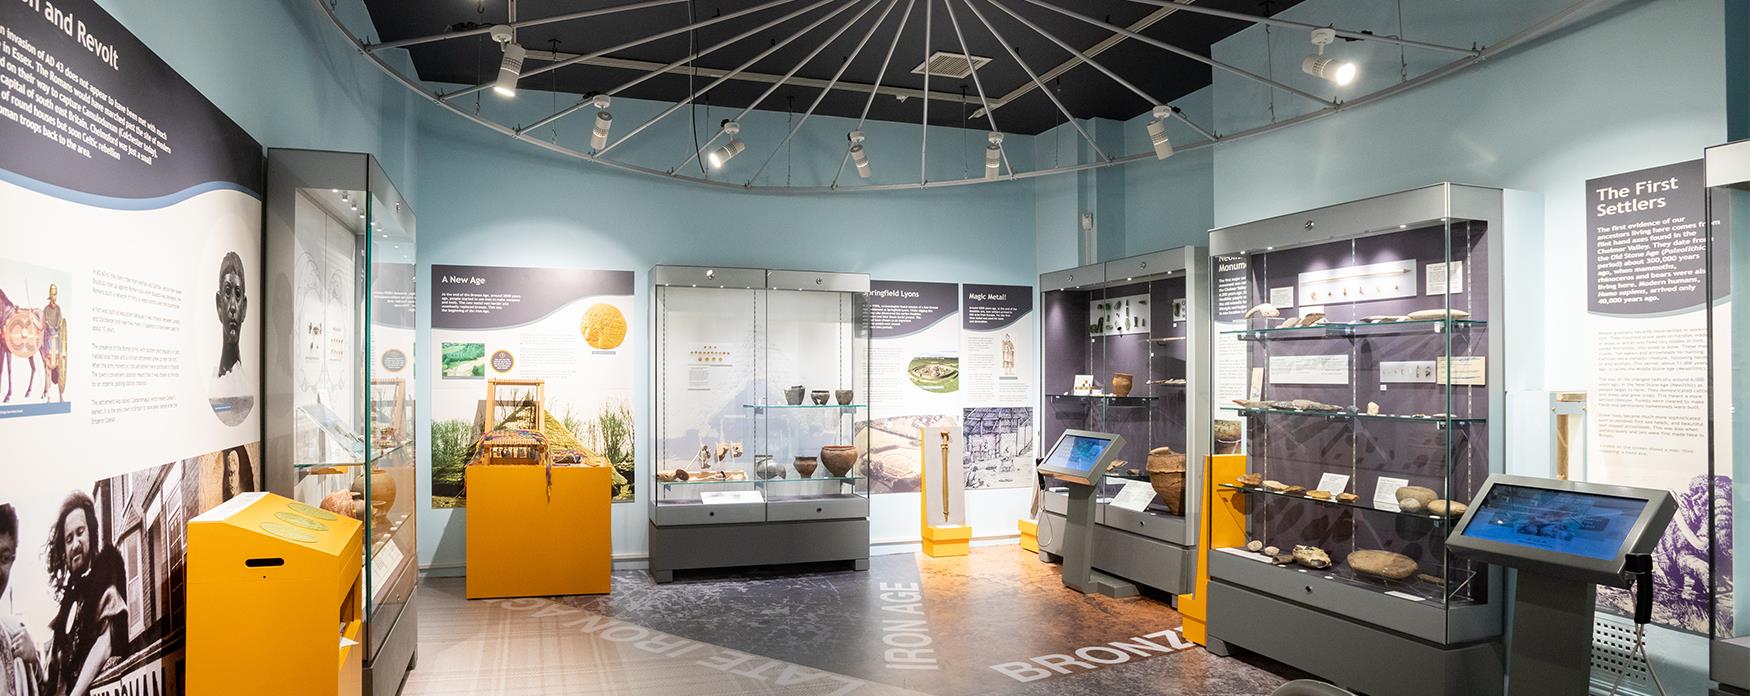 Chelmsford Museum interior with display cabinets, wall panels and interactive screens